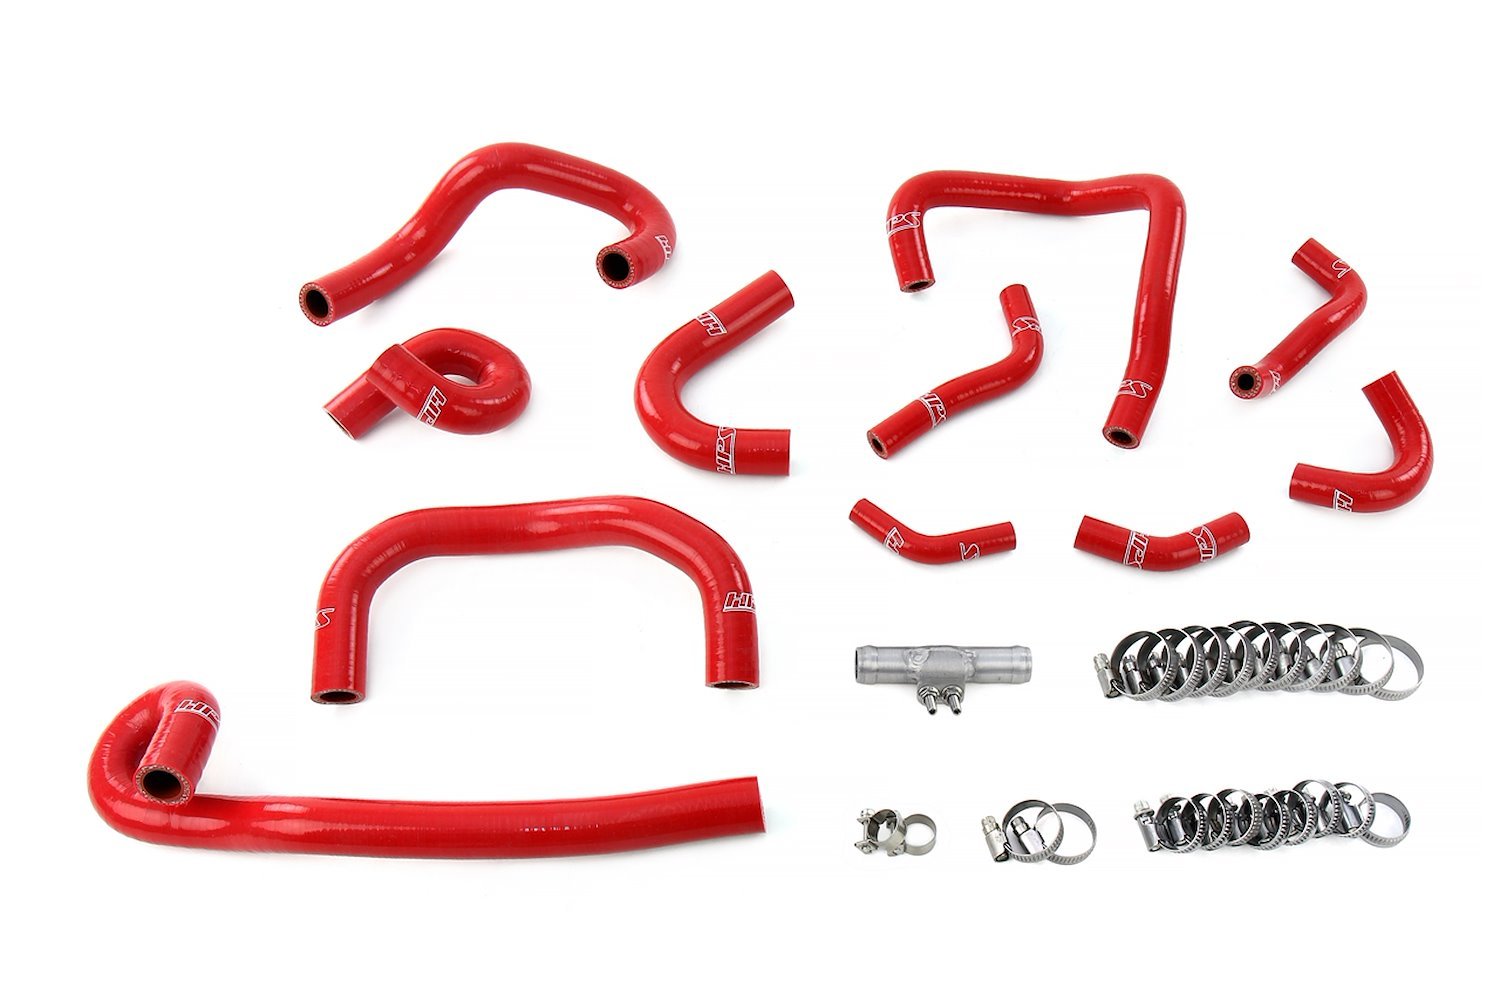 57-2139-RED Coolant Hose Kit, 3-Ply Reinforced Silicone, Replaces Rubber Ancillary Coolant & Heater Hoses